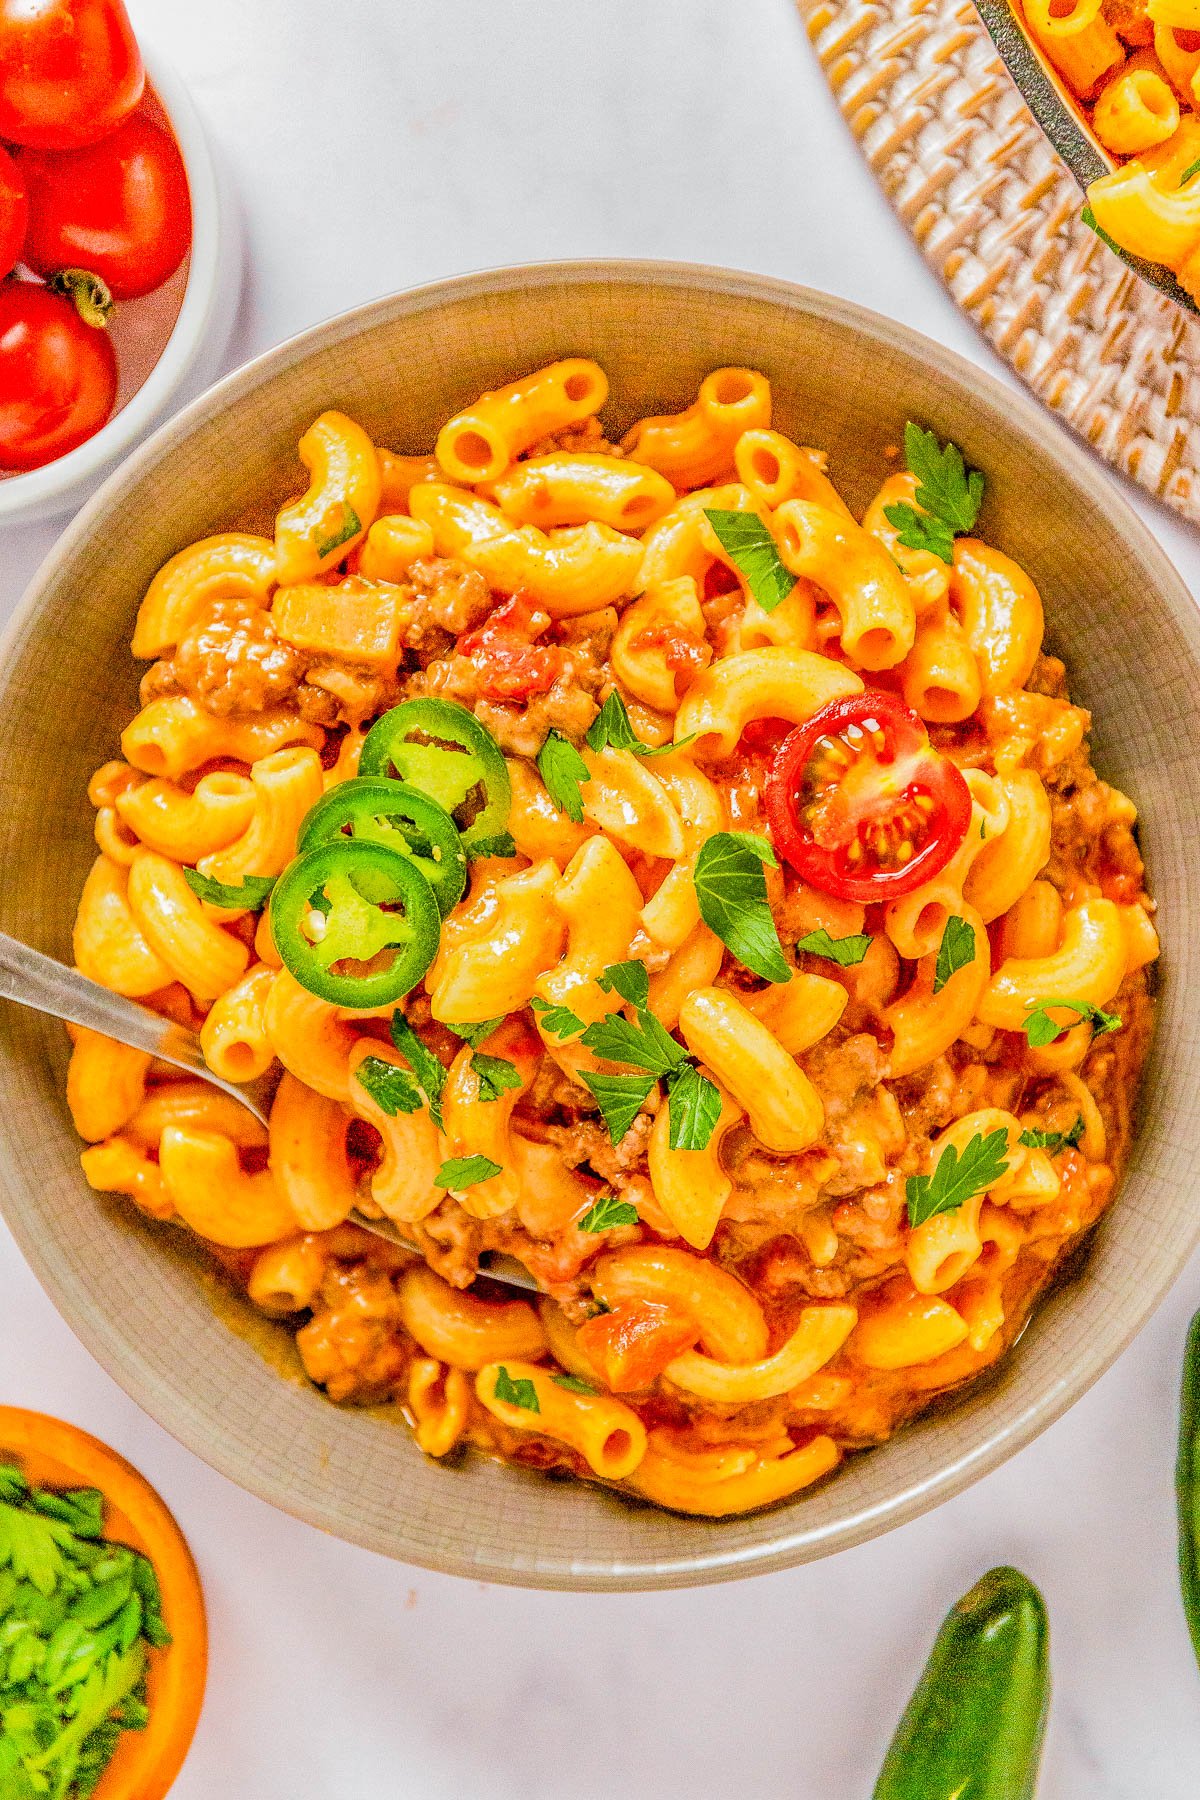 A bowl of creamy macaroni pasta topped with sliced jalapenos, cherry tomatoes, and fresh herbs, served on a white surface.